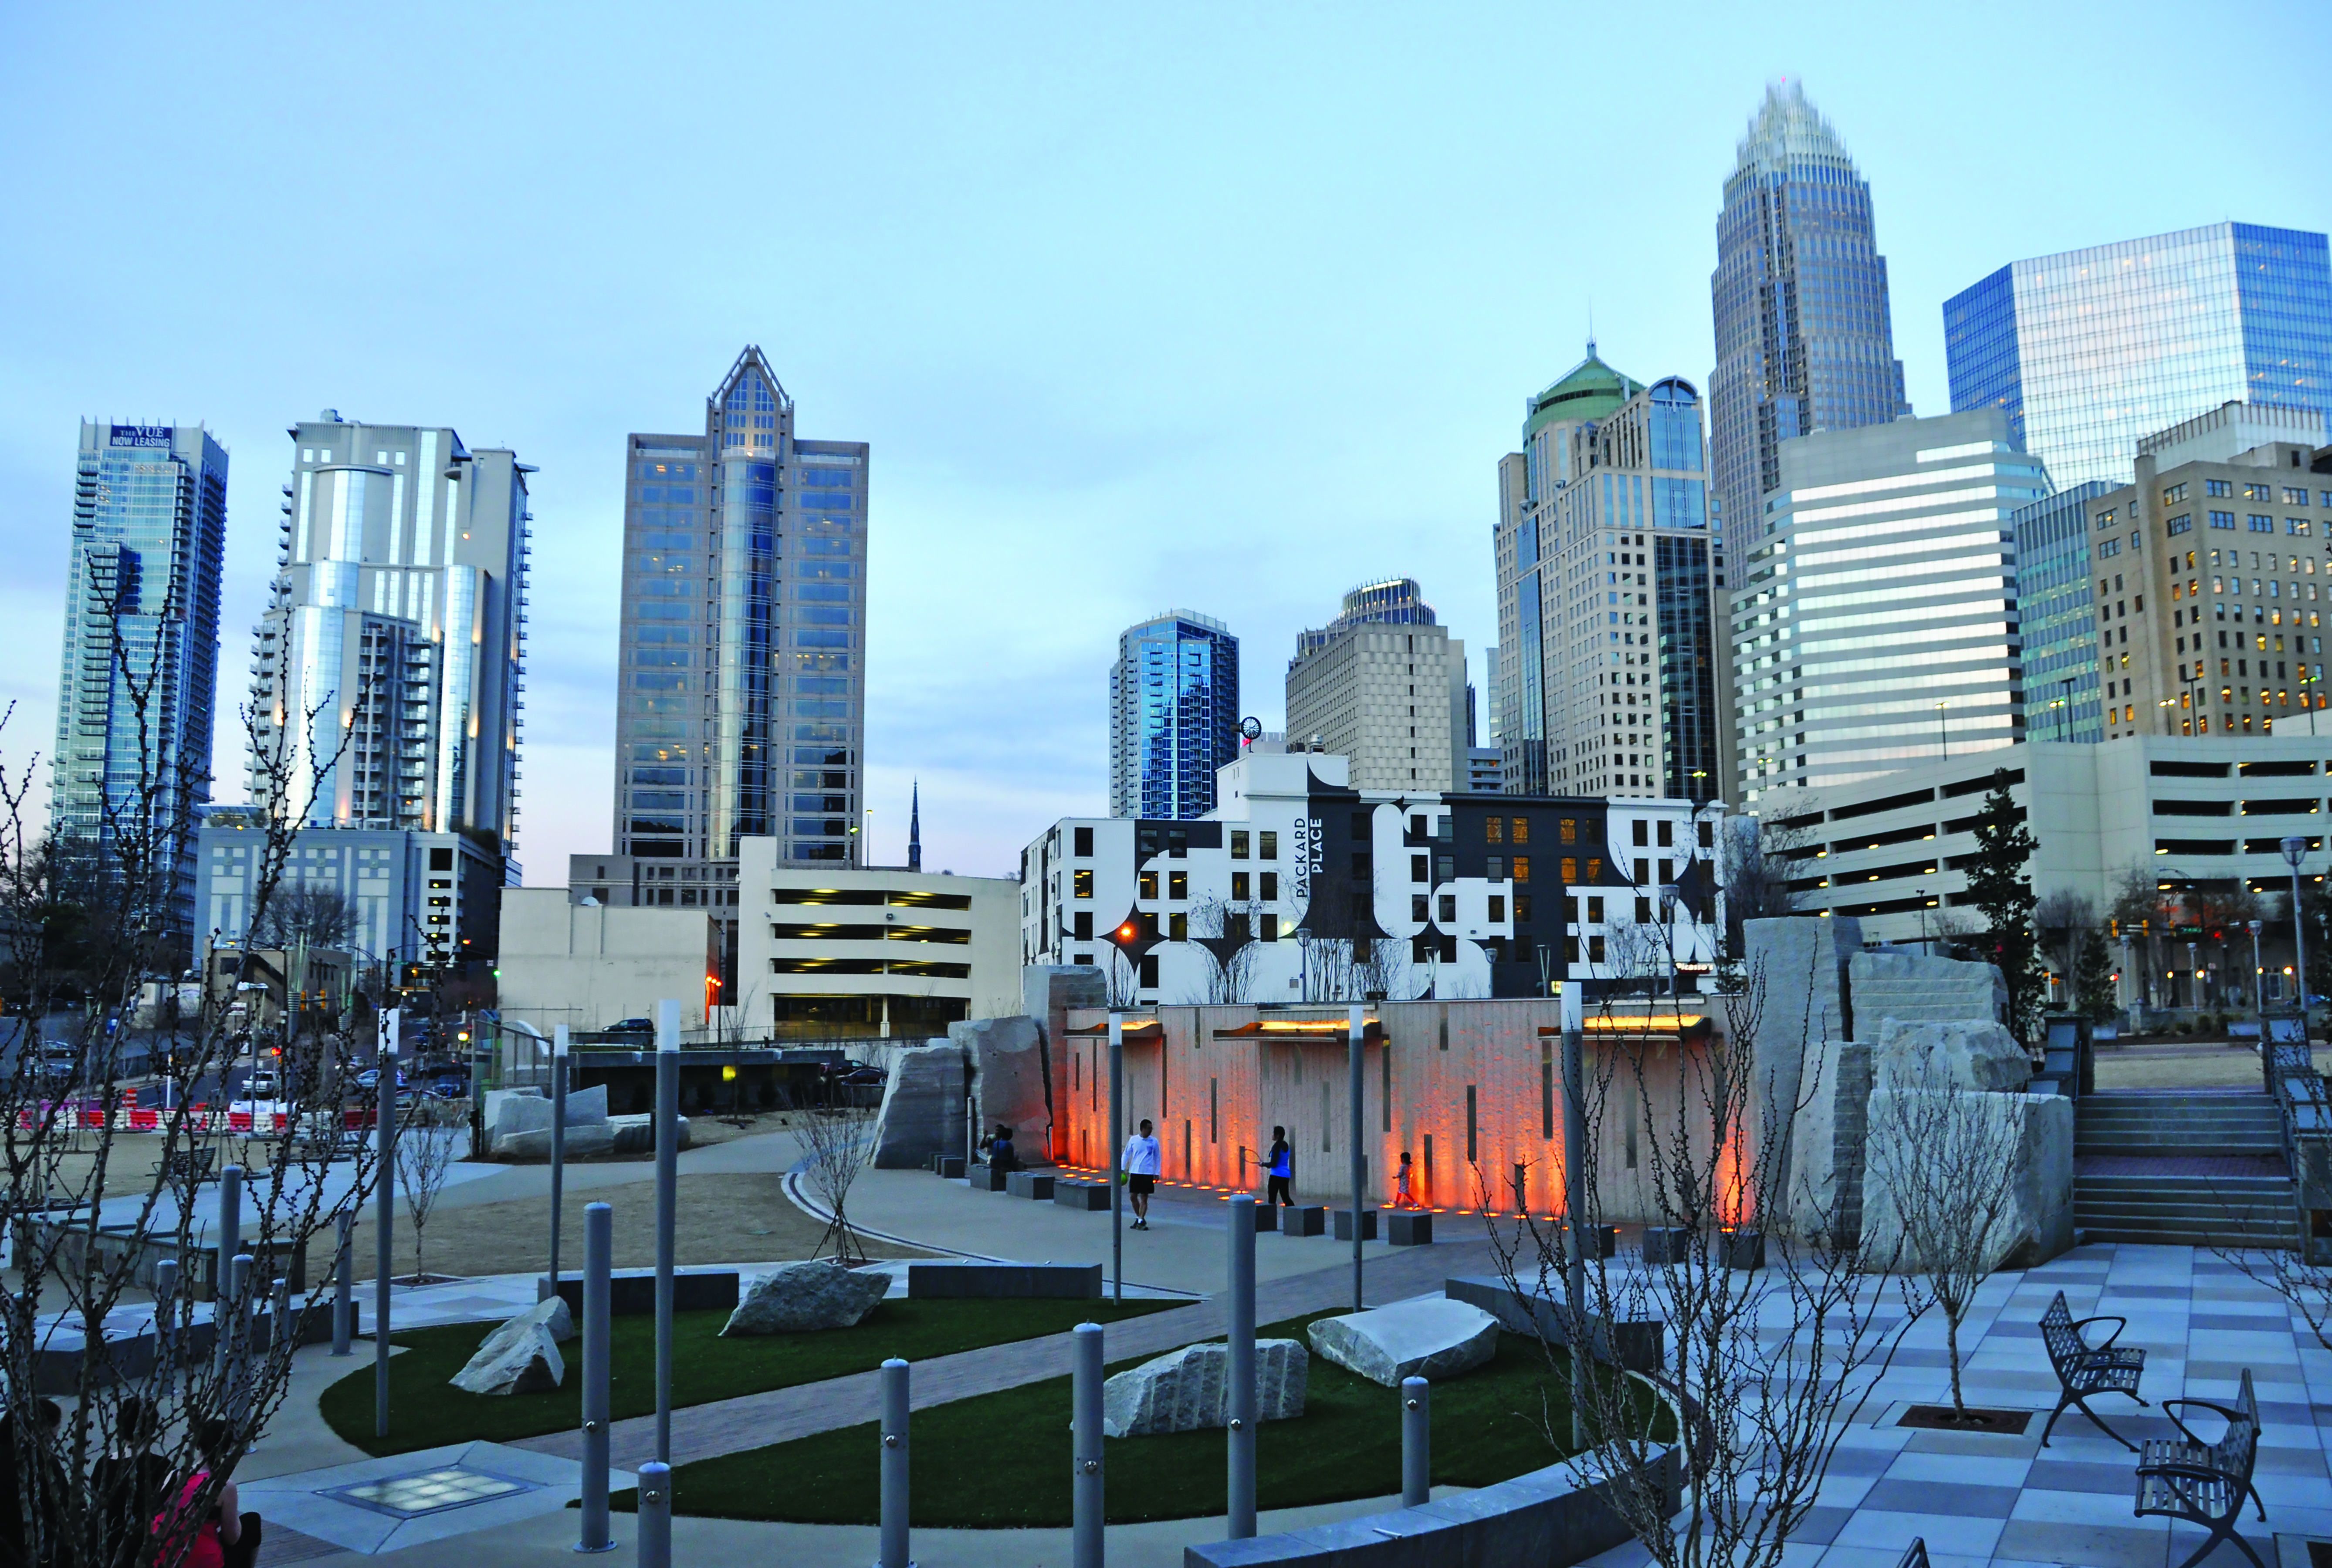 Charlotte from Romare Bearden Park with WFAE